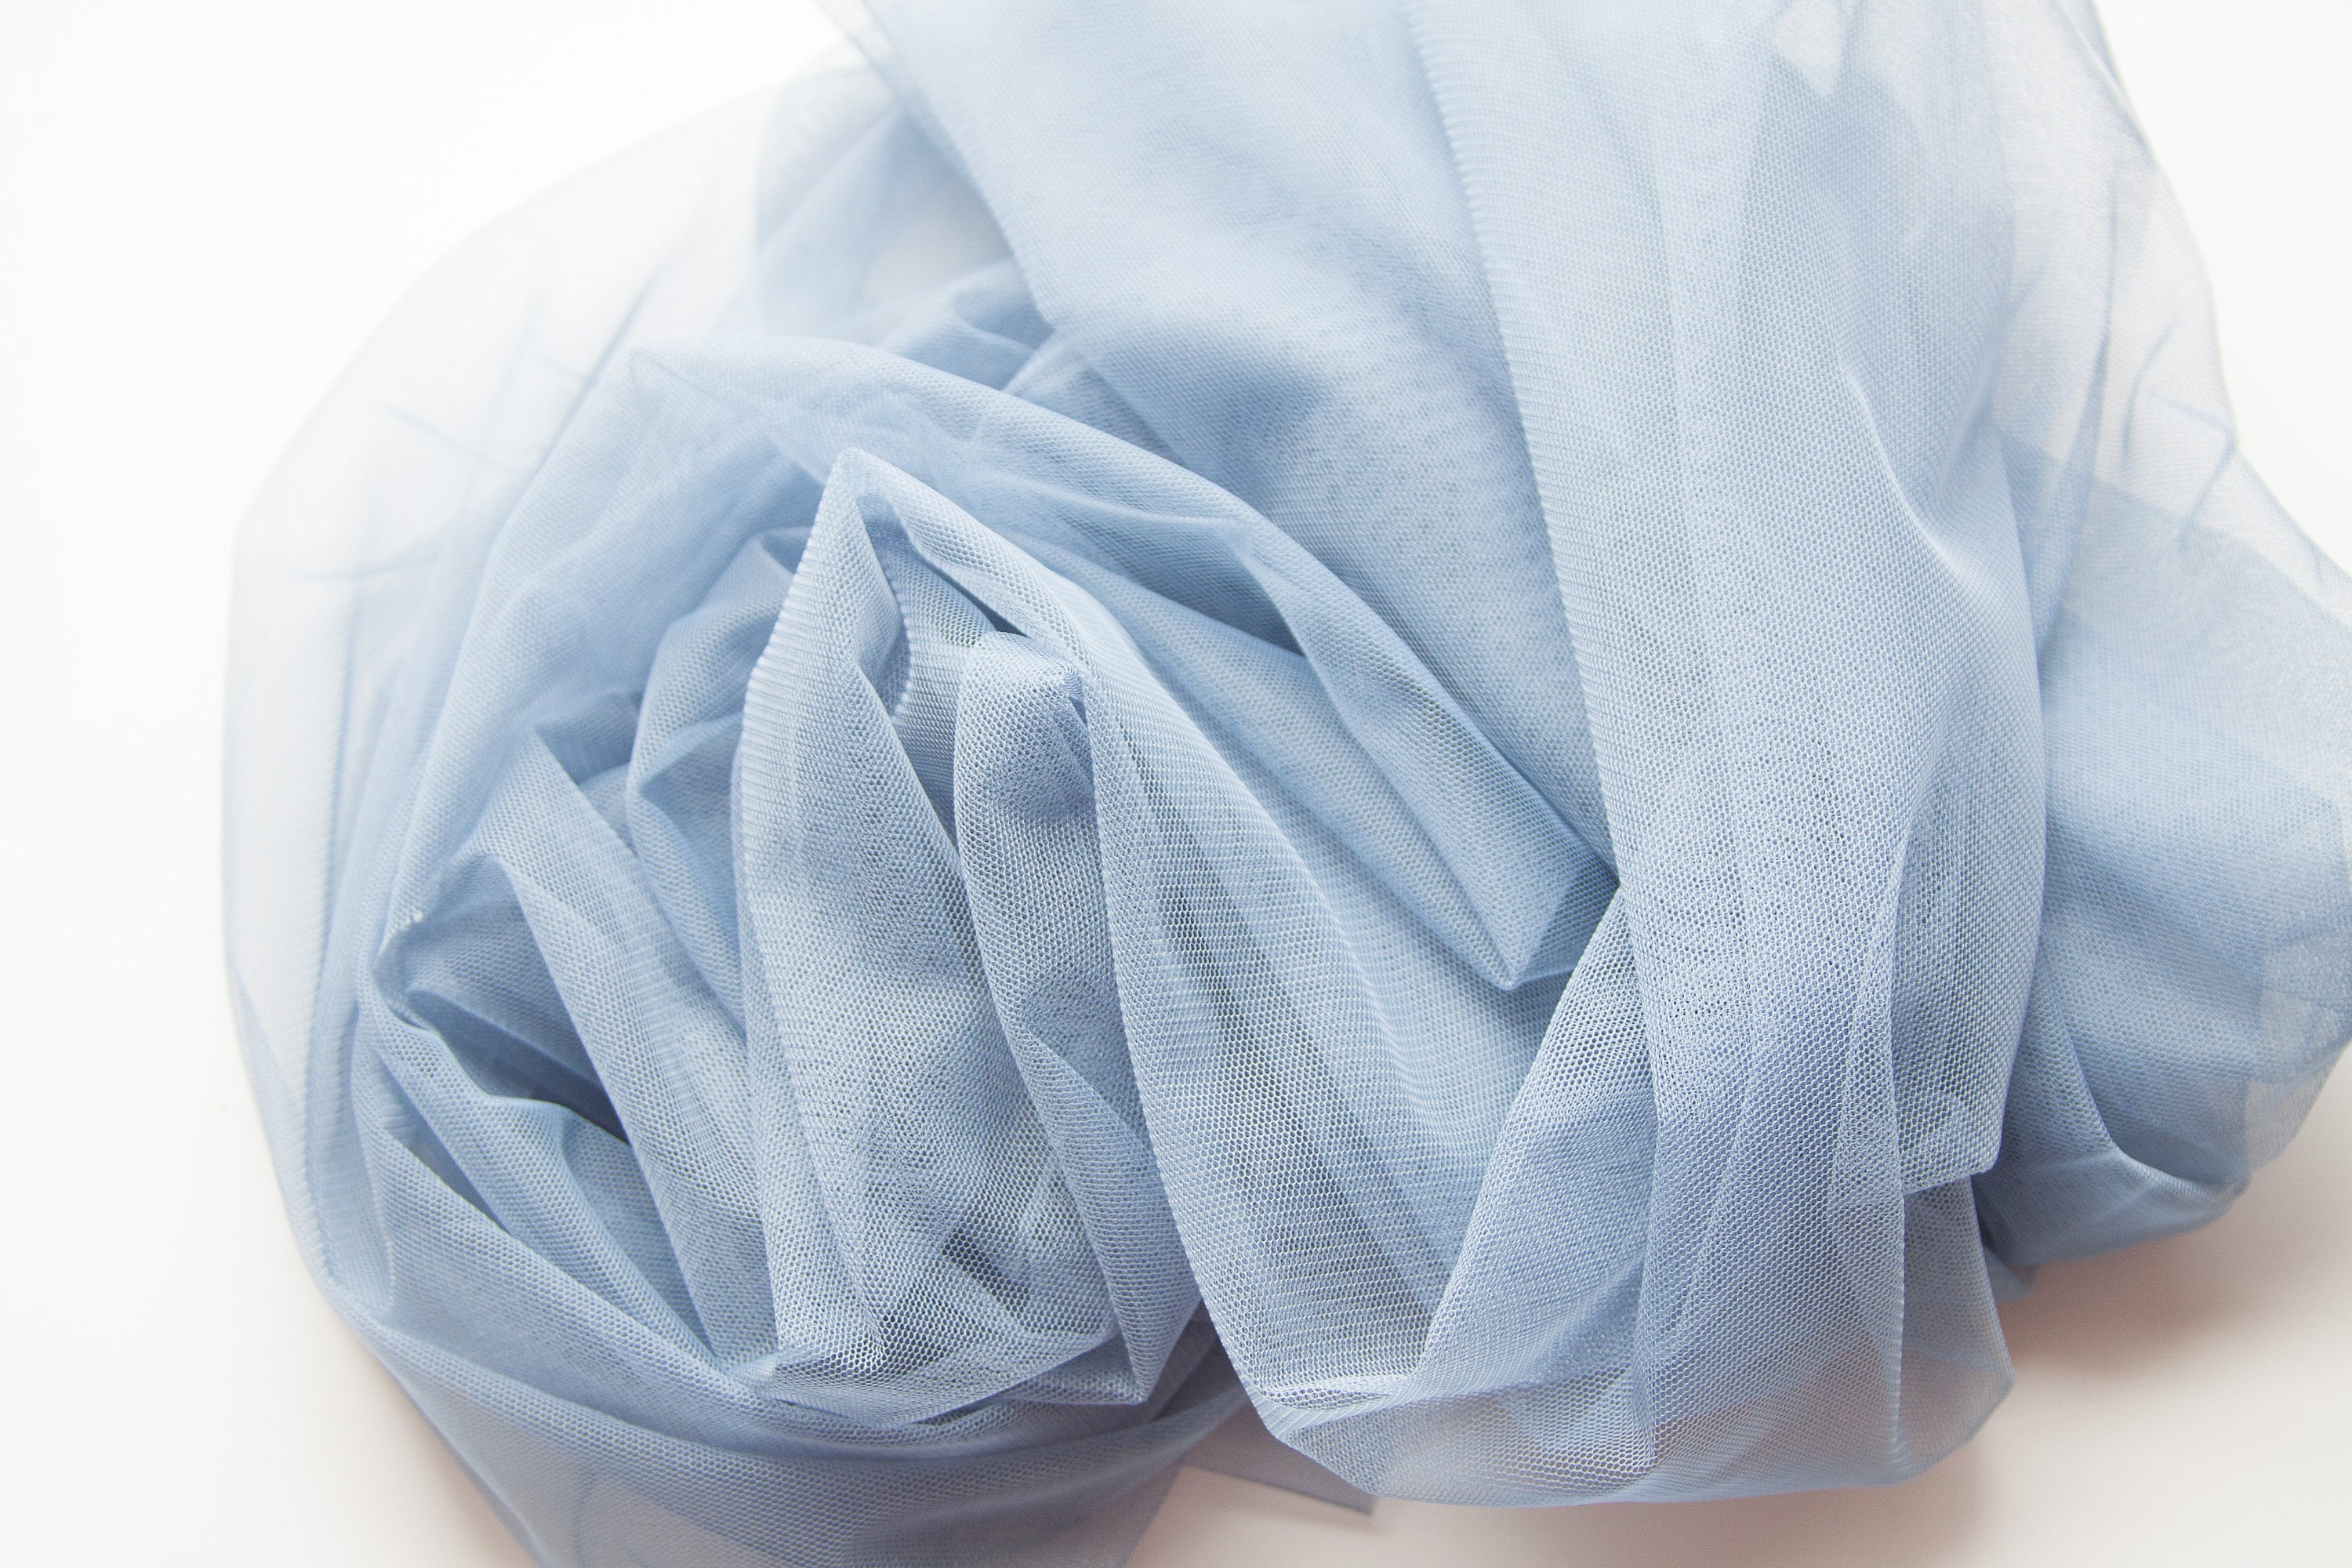 CV Linens Soft Tulle Fabric Roll 54 x 40 yds - Baby Blue